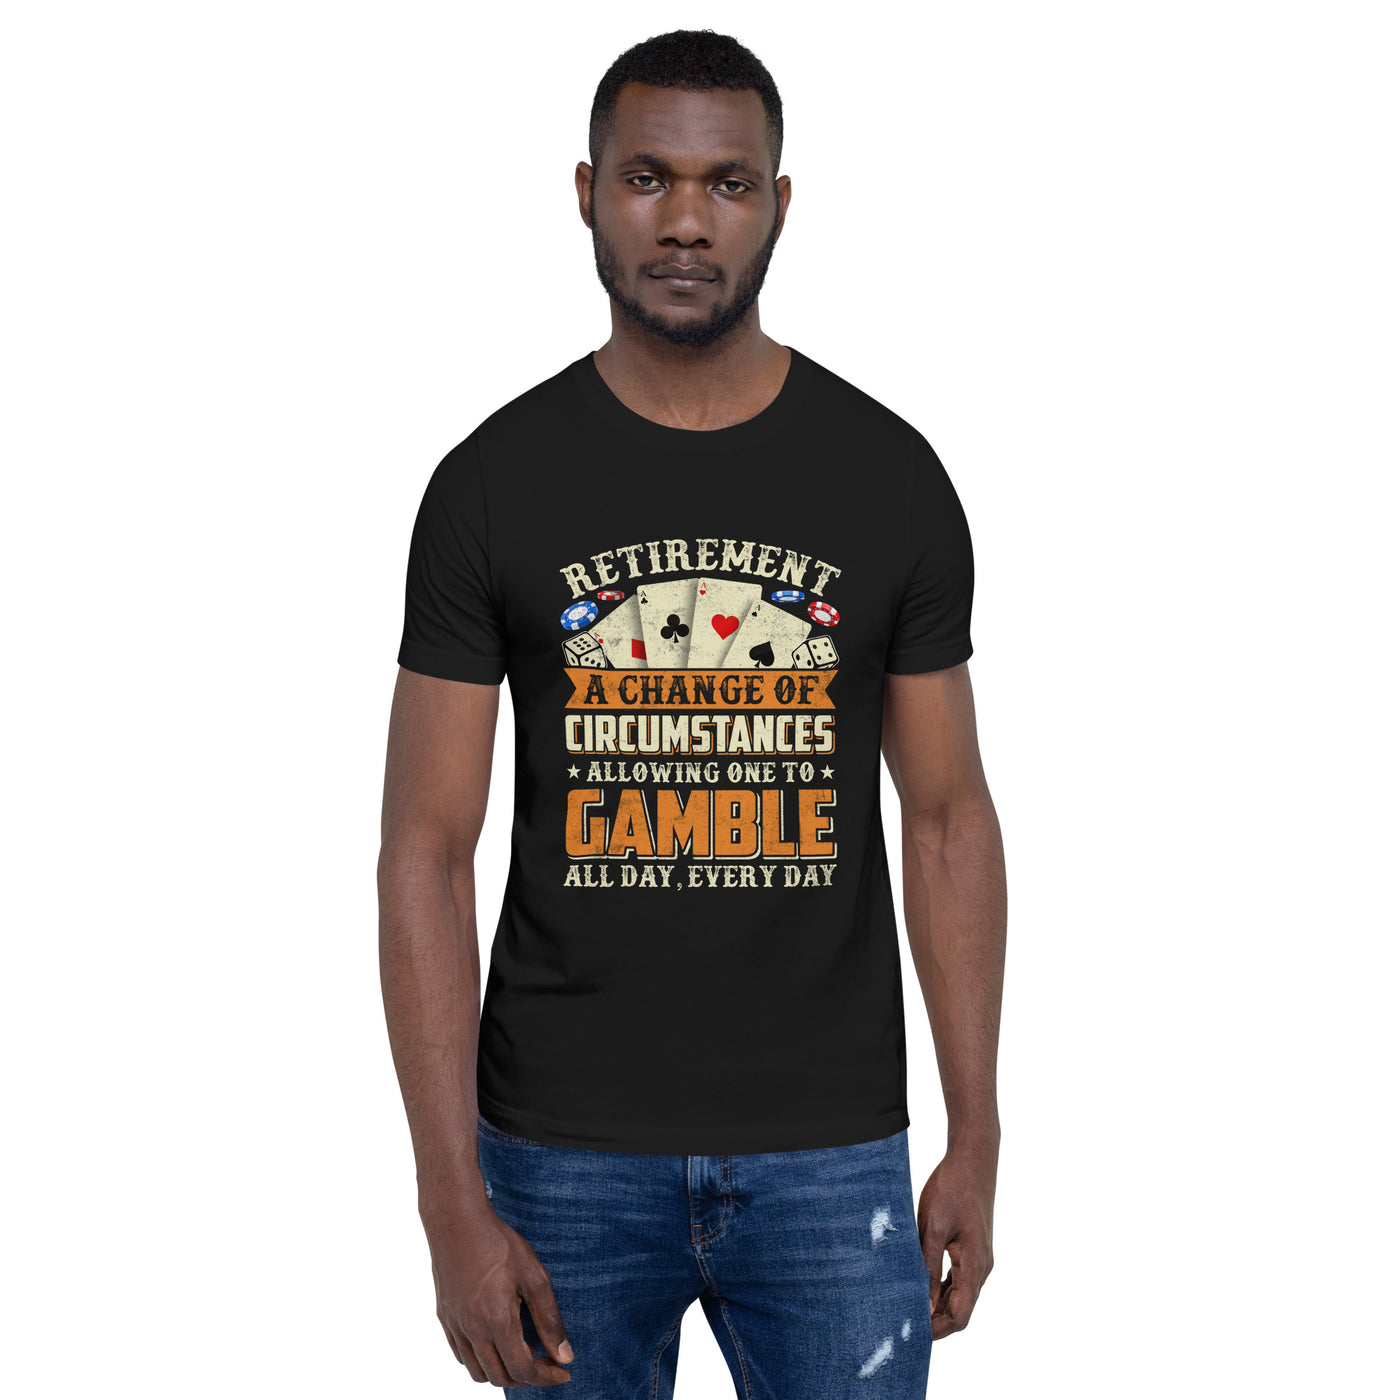 Retirement ; a Change of Circumstance allowing One to Gamble all day everyday - Unisex t-shirt